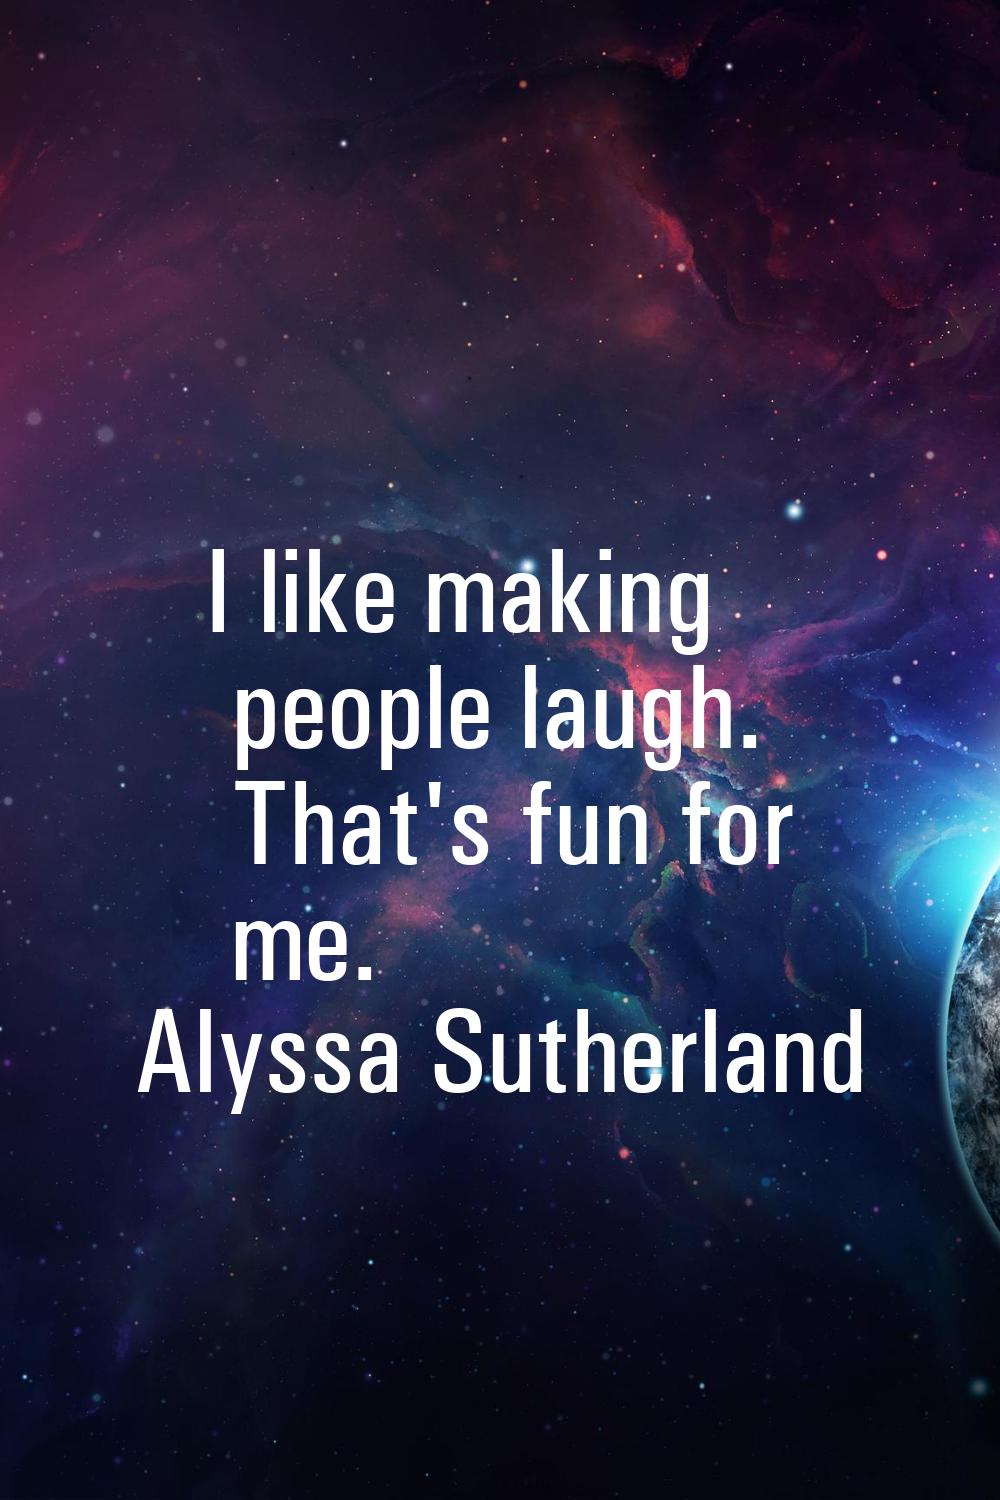 I like making people laugh. That's fun for me.